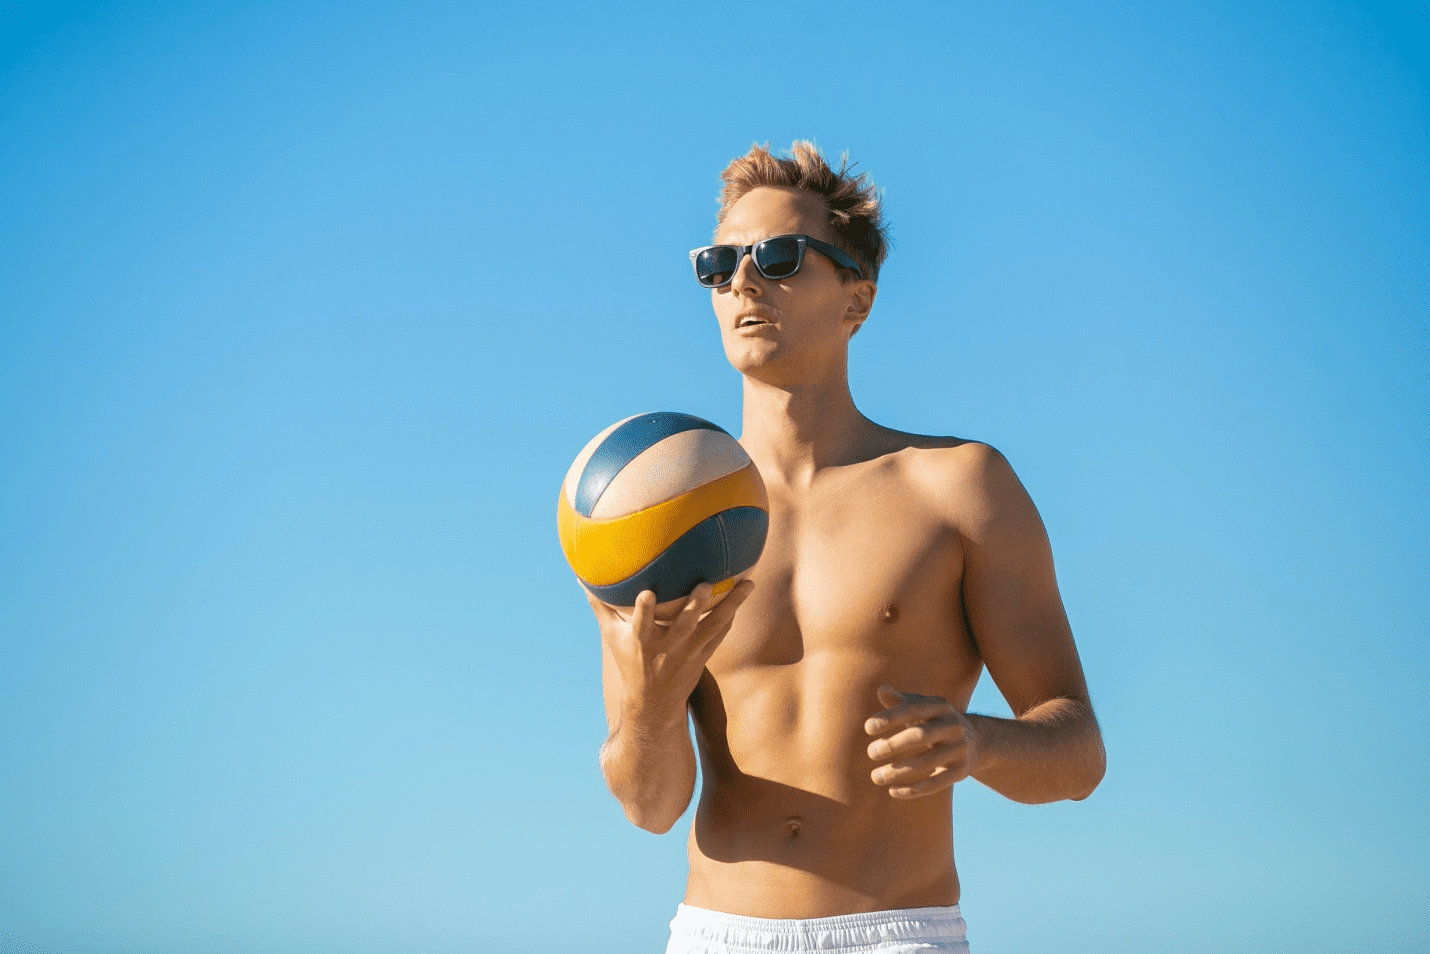 Boy wearing sunglasses holding a volleyball in his right hand